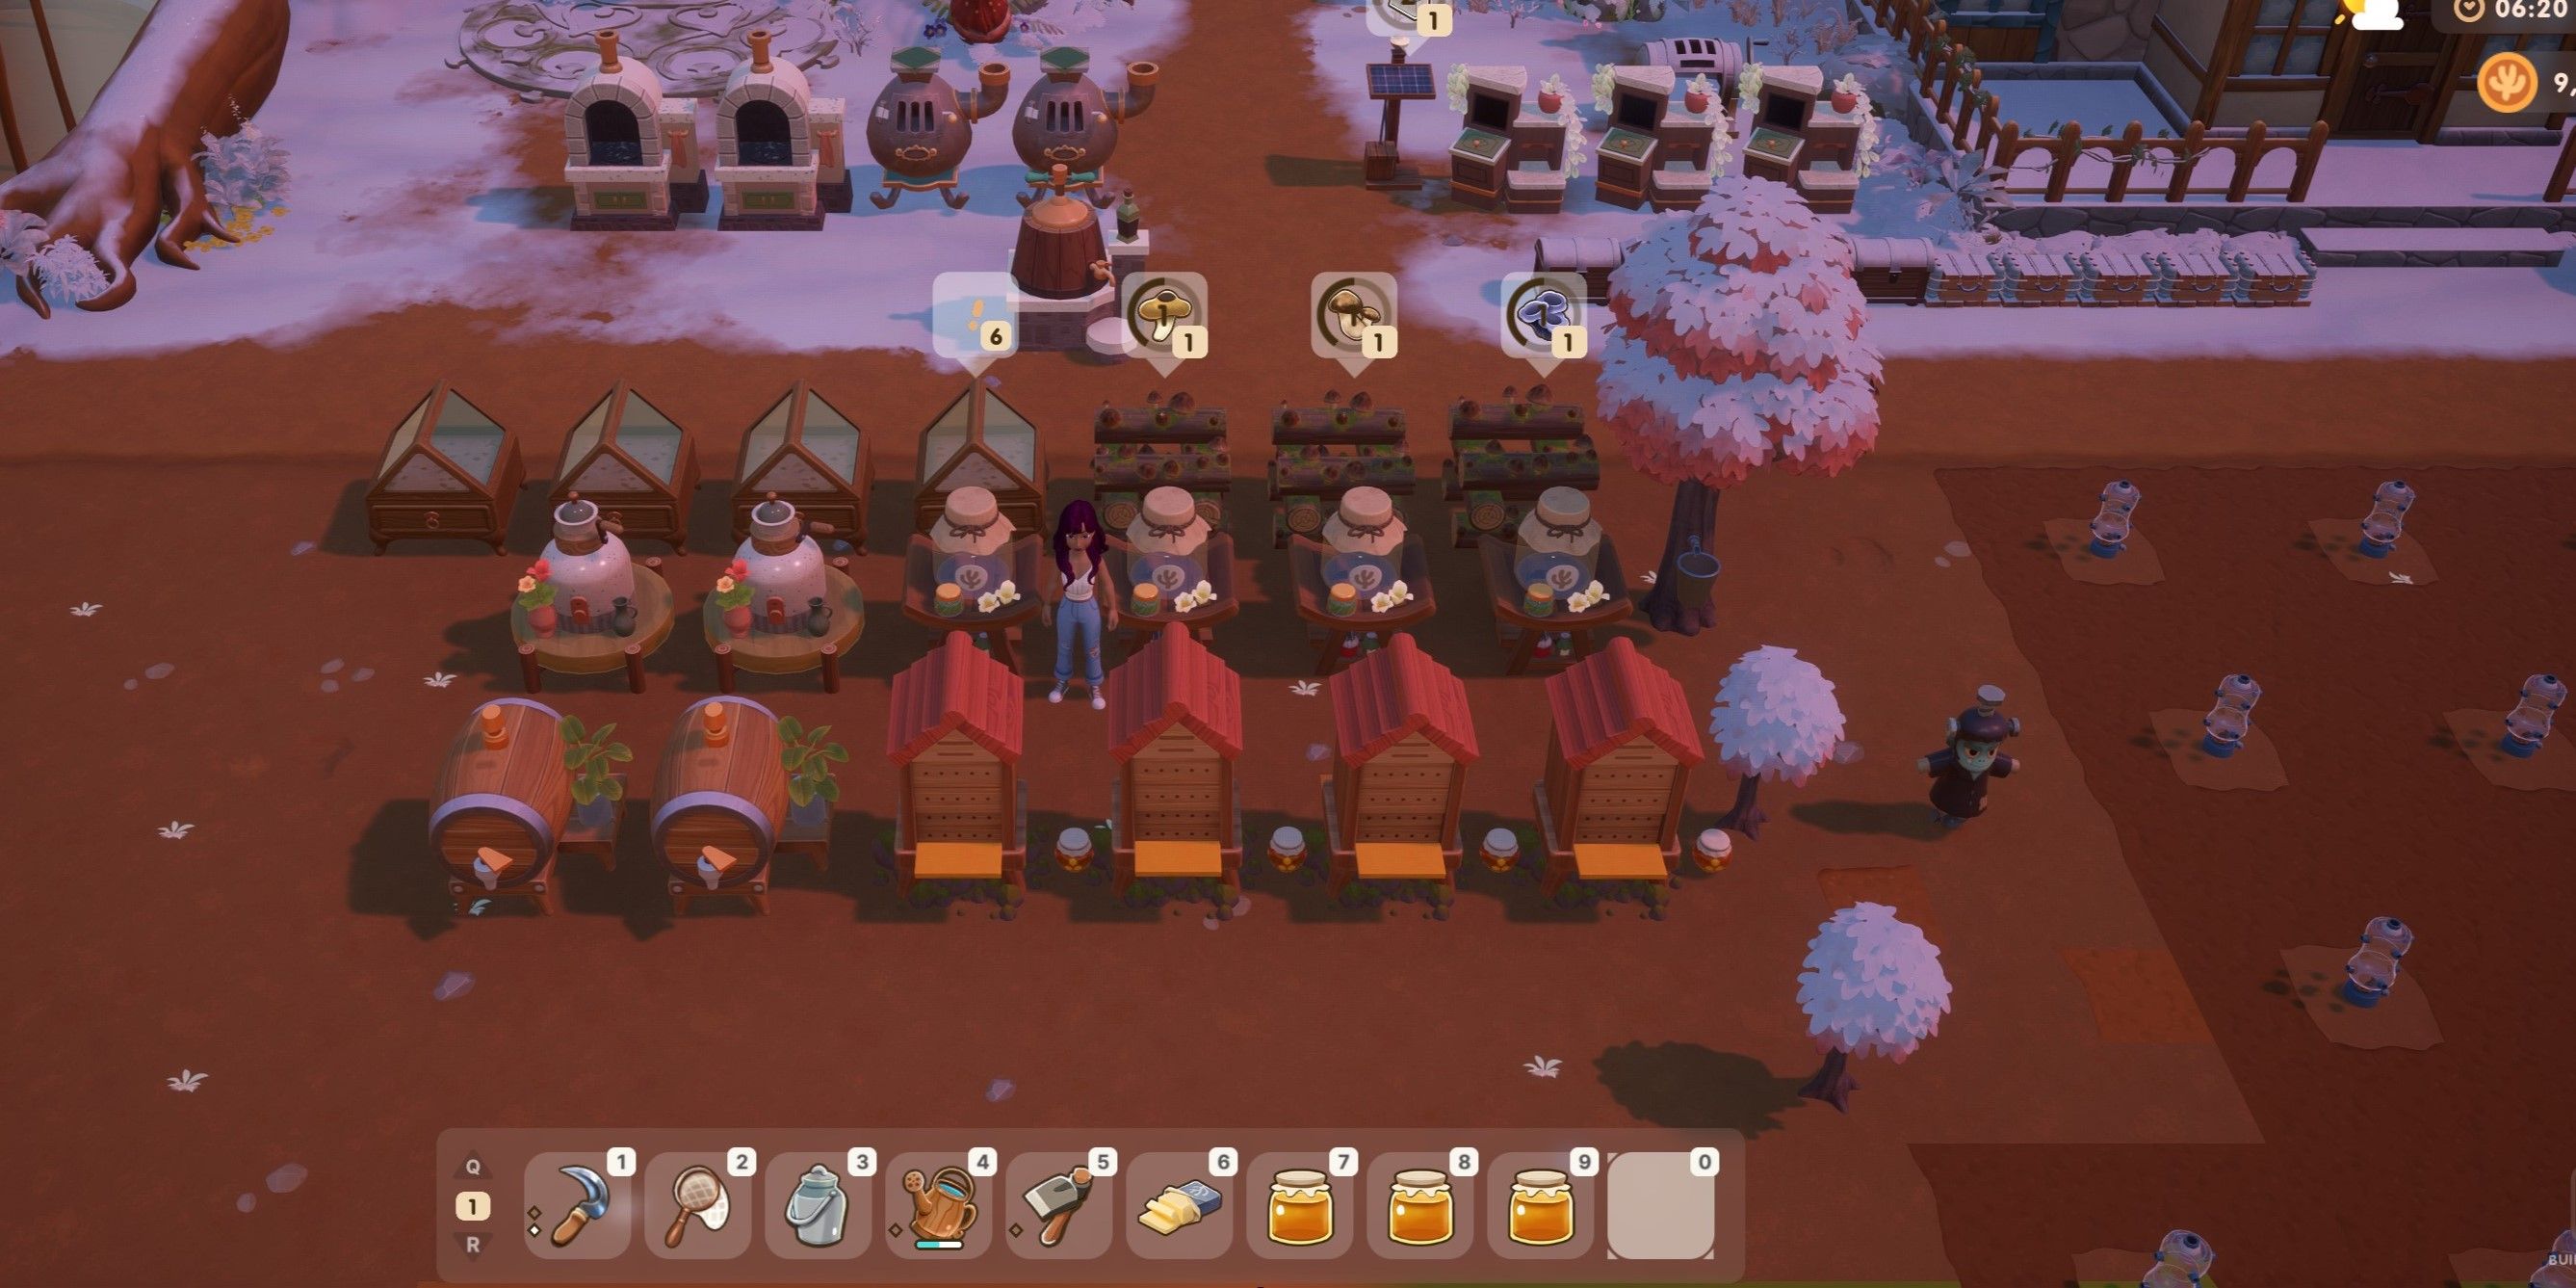 Coral Island: An image of the player character standing in front of a row of artisan machines